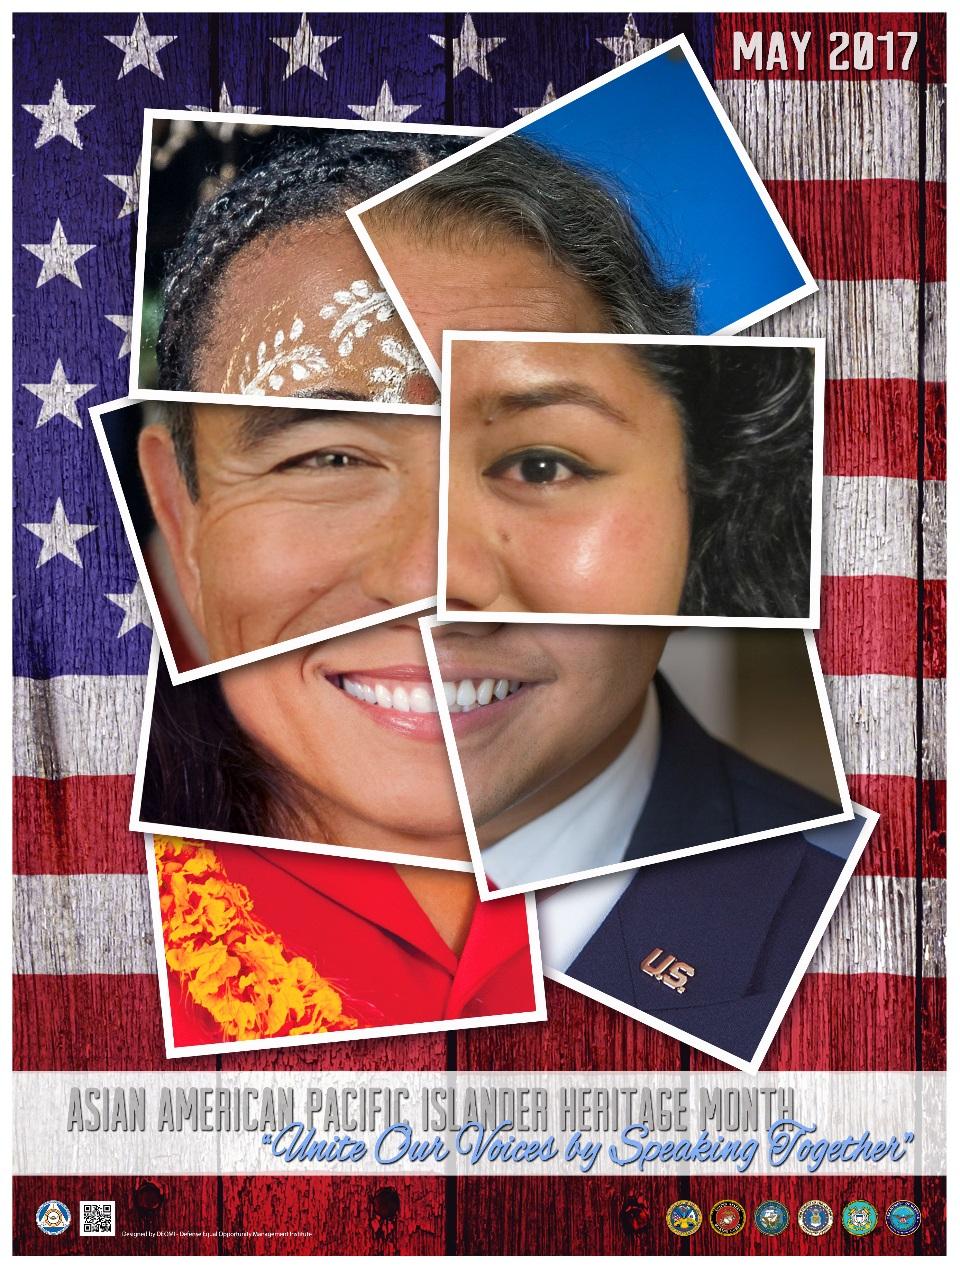 The Federal Asian Pacific American Council has selected the 2017 theme: Unite Our Voices by Speaking Together.